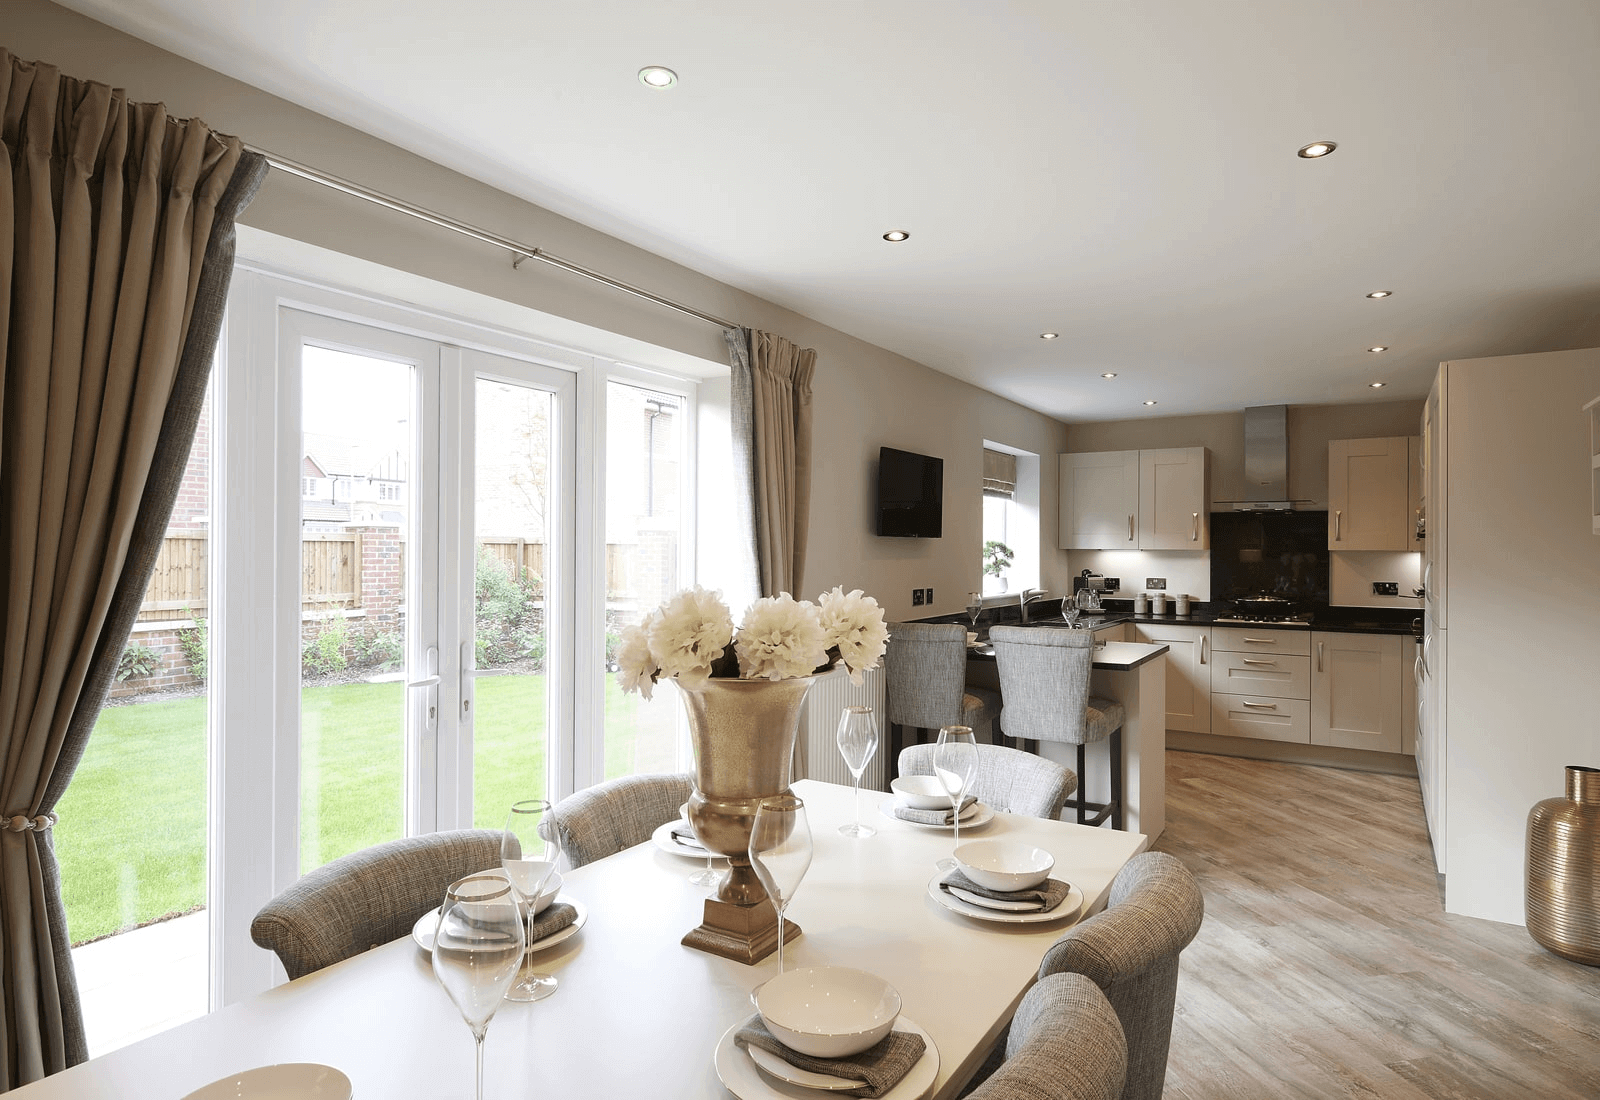 Kitchen Diner in a Banbury Show Home